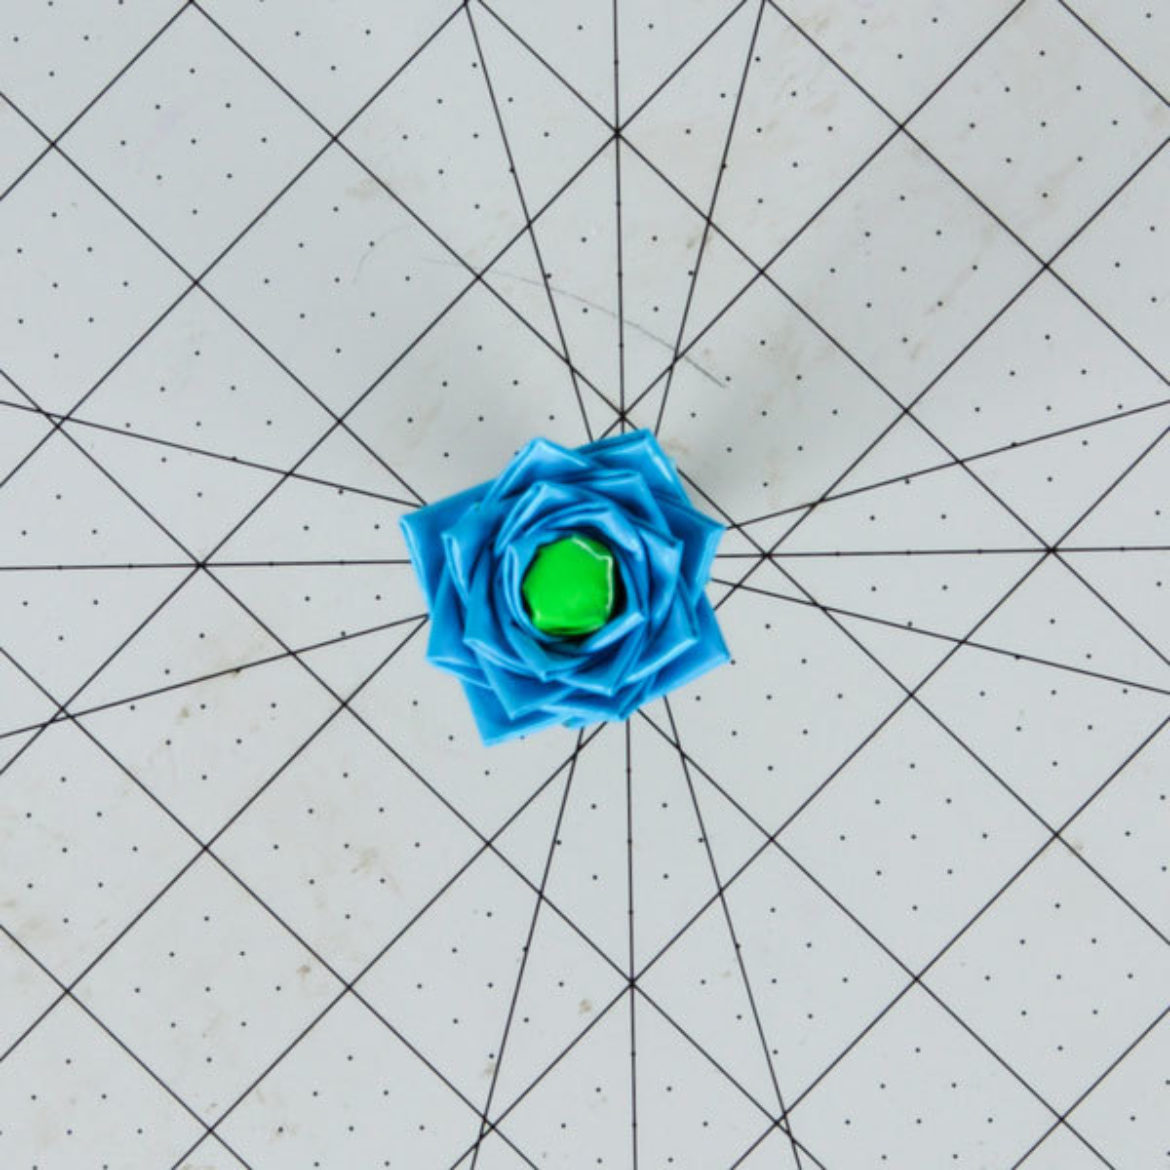 Top view of a miniature rose